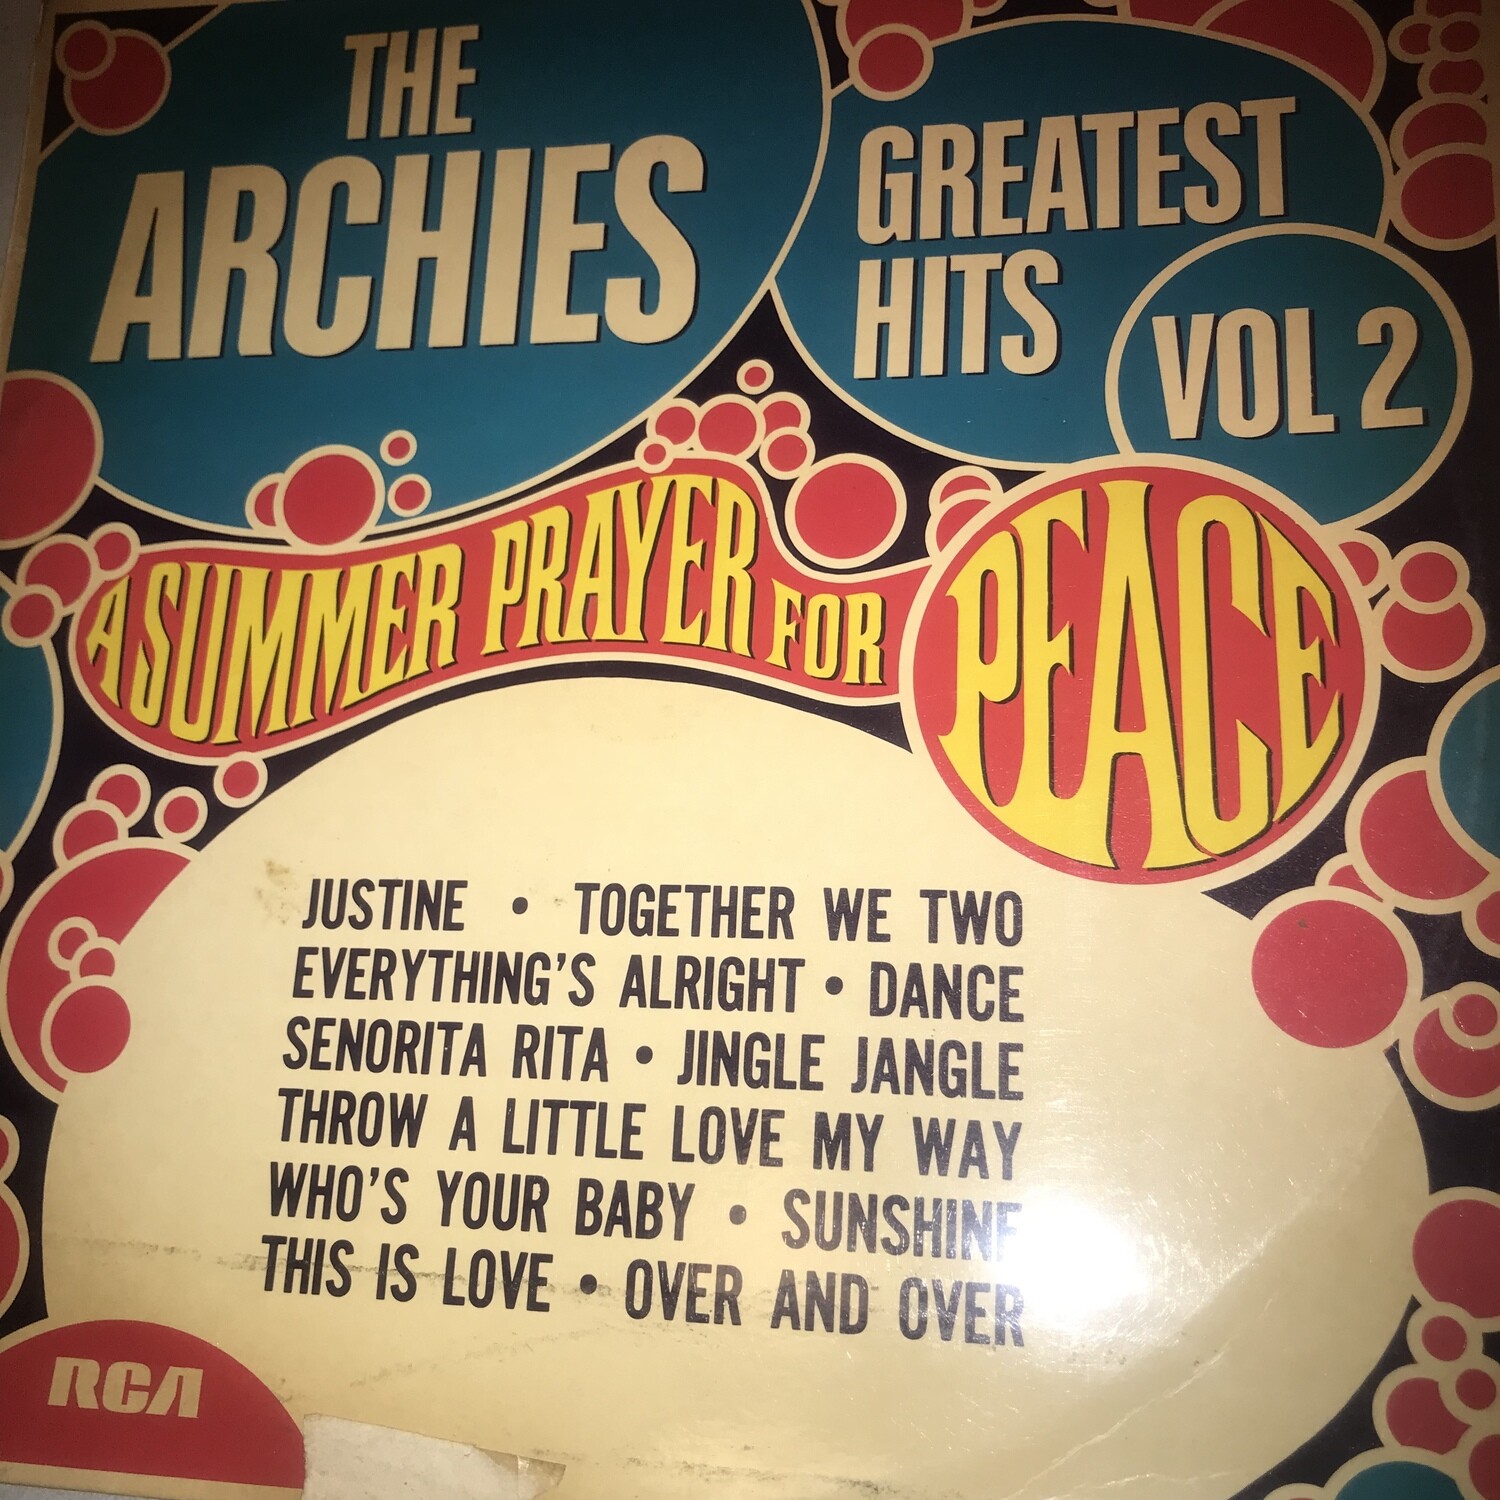 The Archies - The Greatest Hits (Vol. 2)